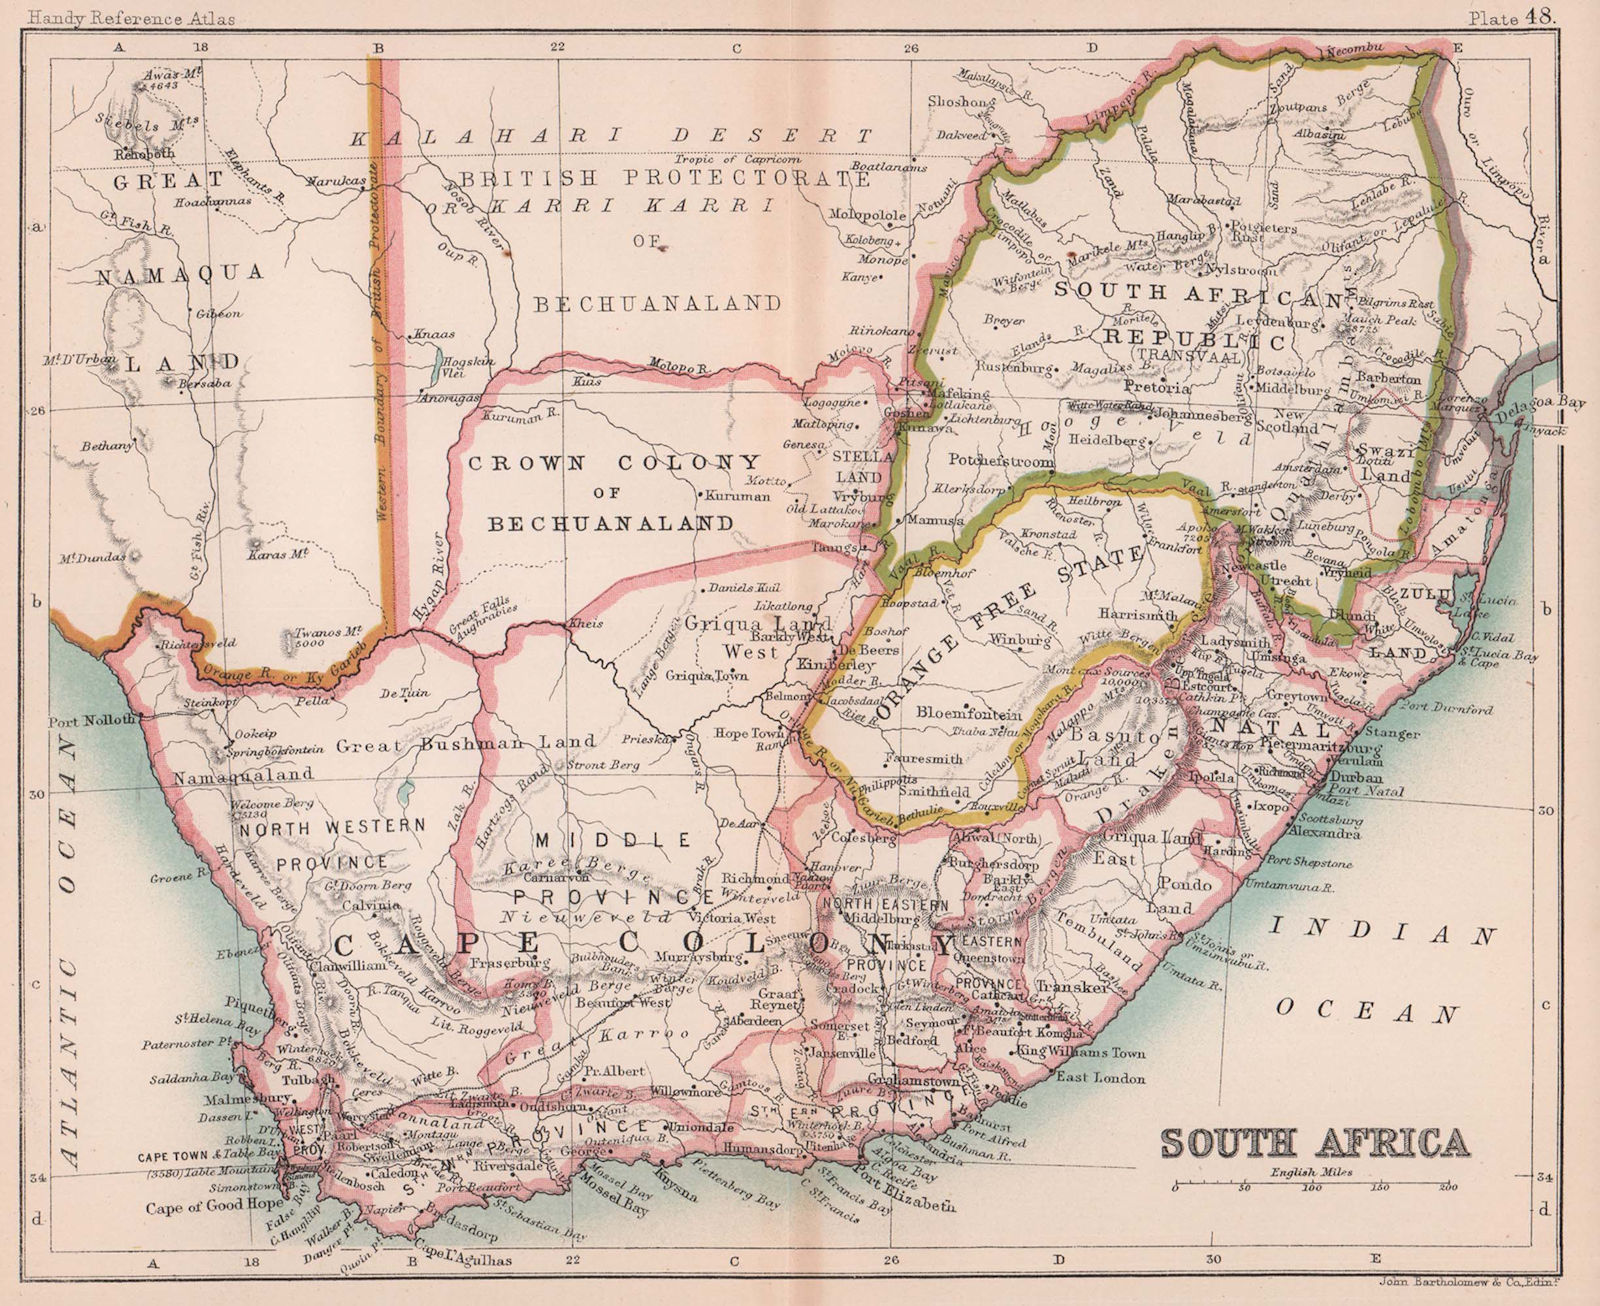 South Africa. Cape Colony. Bechuanaland. BARTHOLOMEW 1893 old antique map